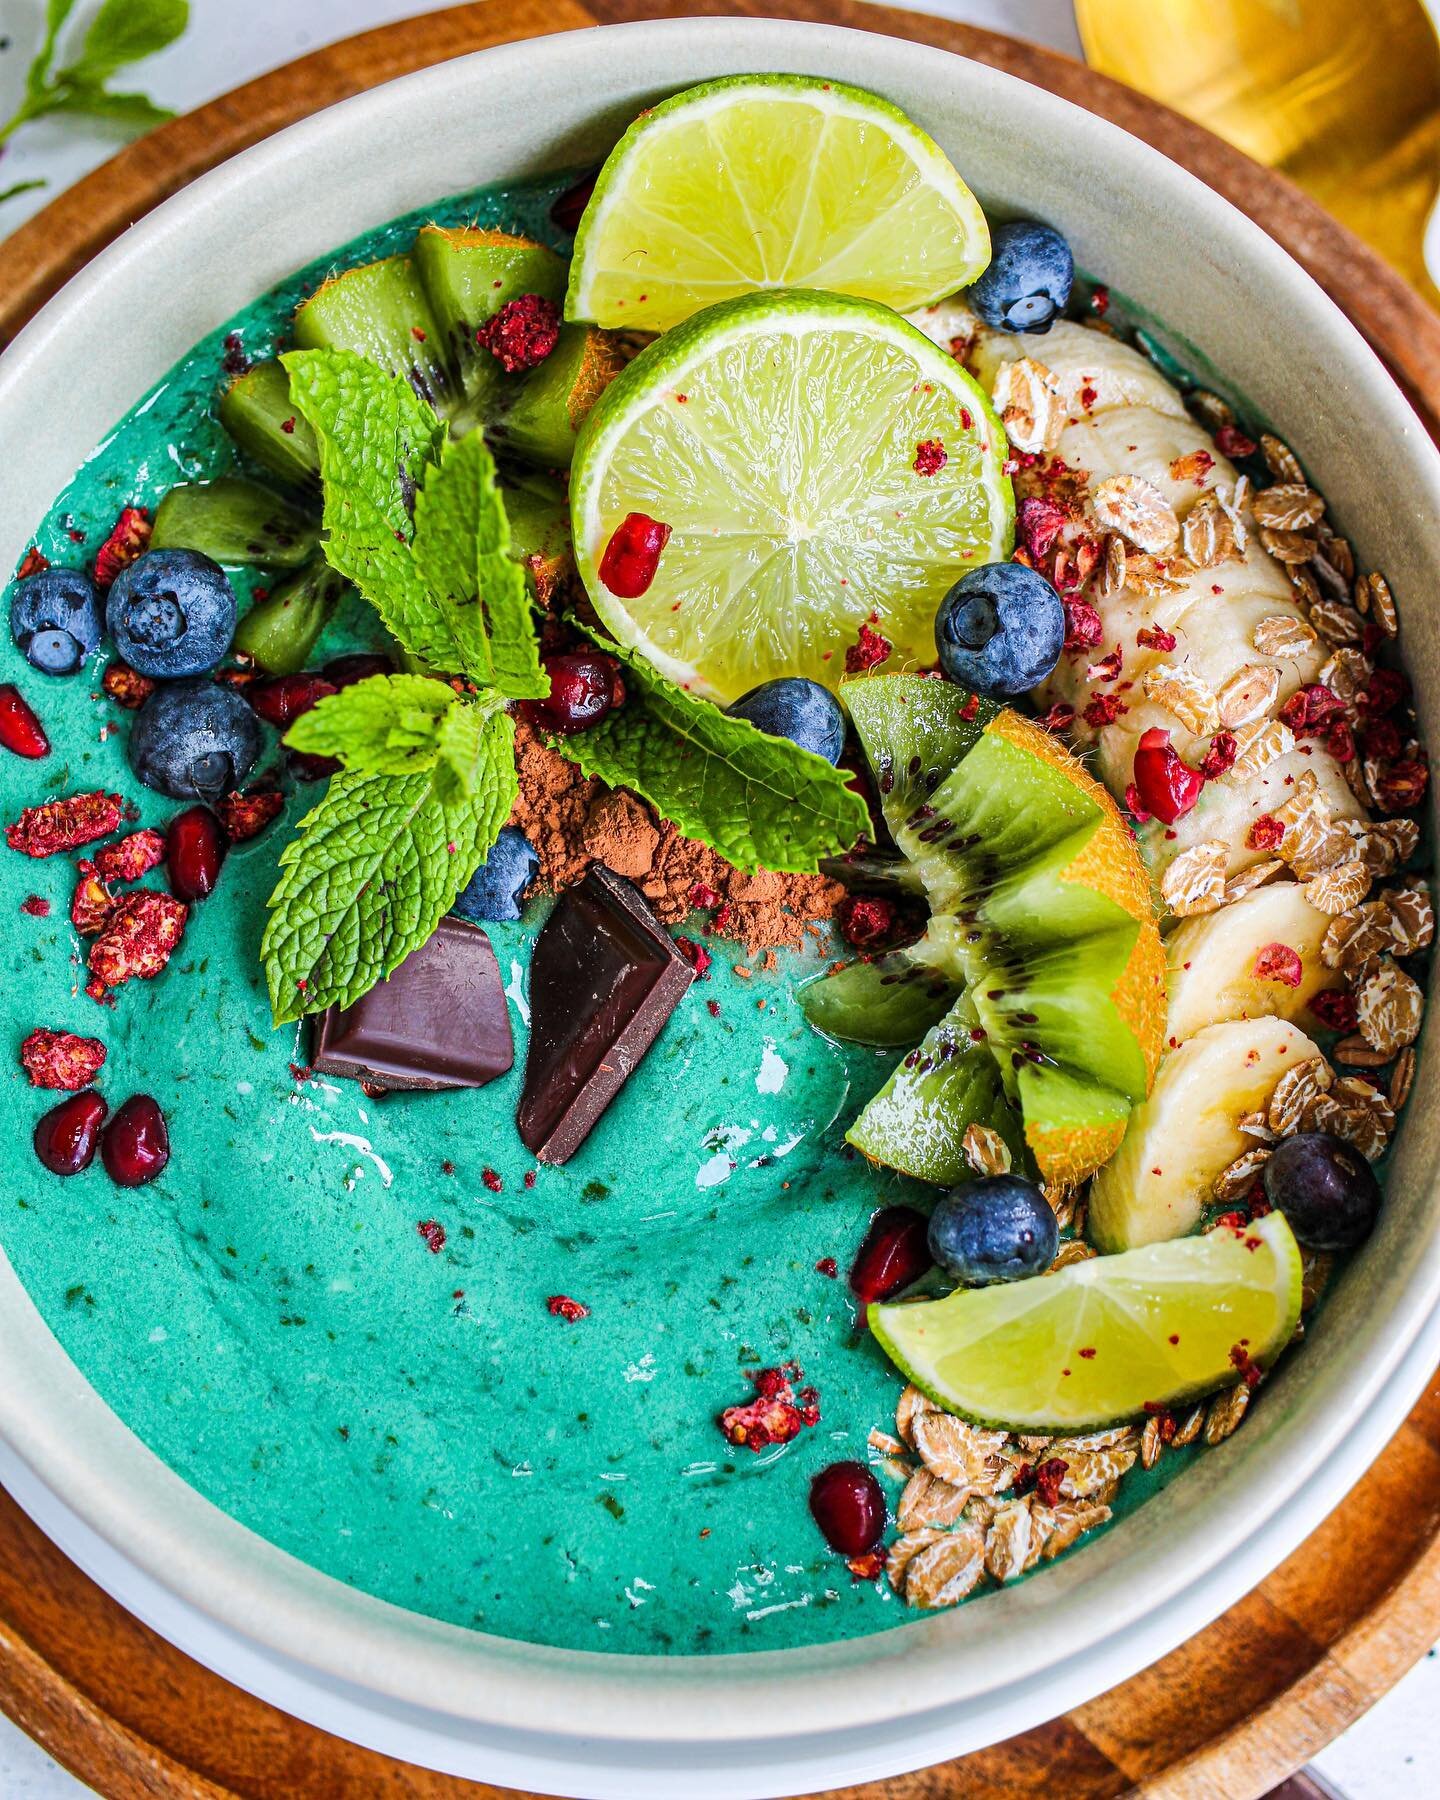 Self-love is making yourself an over the top breakfast 🥝🫐🍌

Here is a recipe you can try to do just that:
MINT CHOC CHIP SMOOTHIE 

Ingredients:
1 tbsp cacao powder

1 (100g) frozen banana

125ml unsweetened soya milk (or oat for a nut-free option